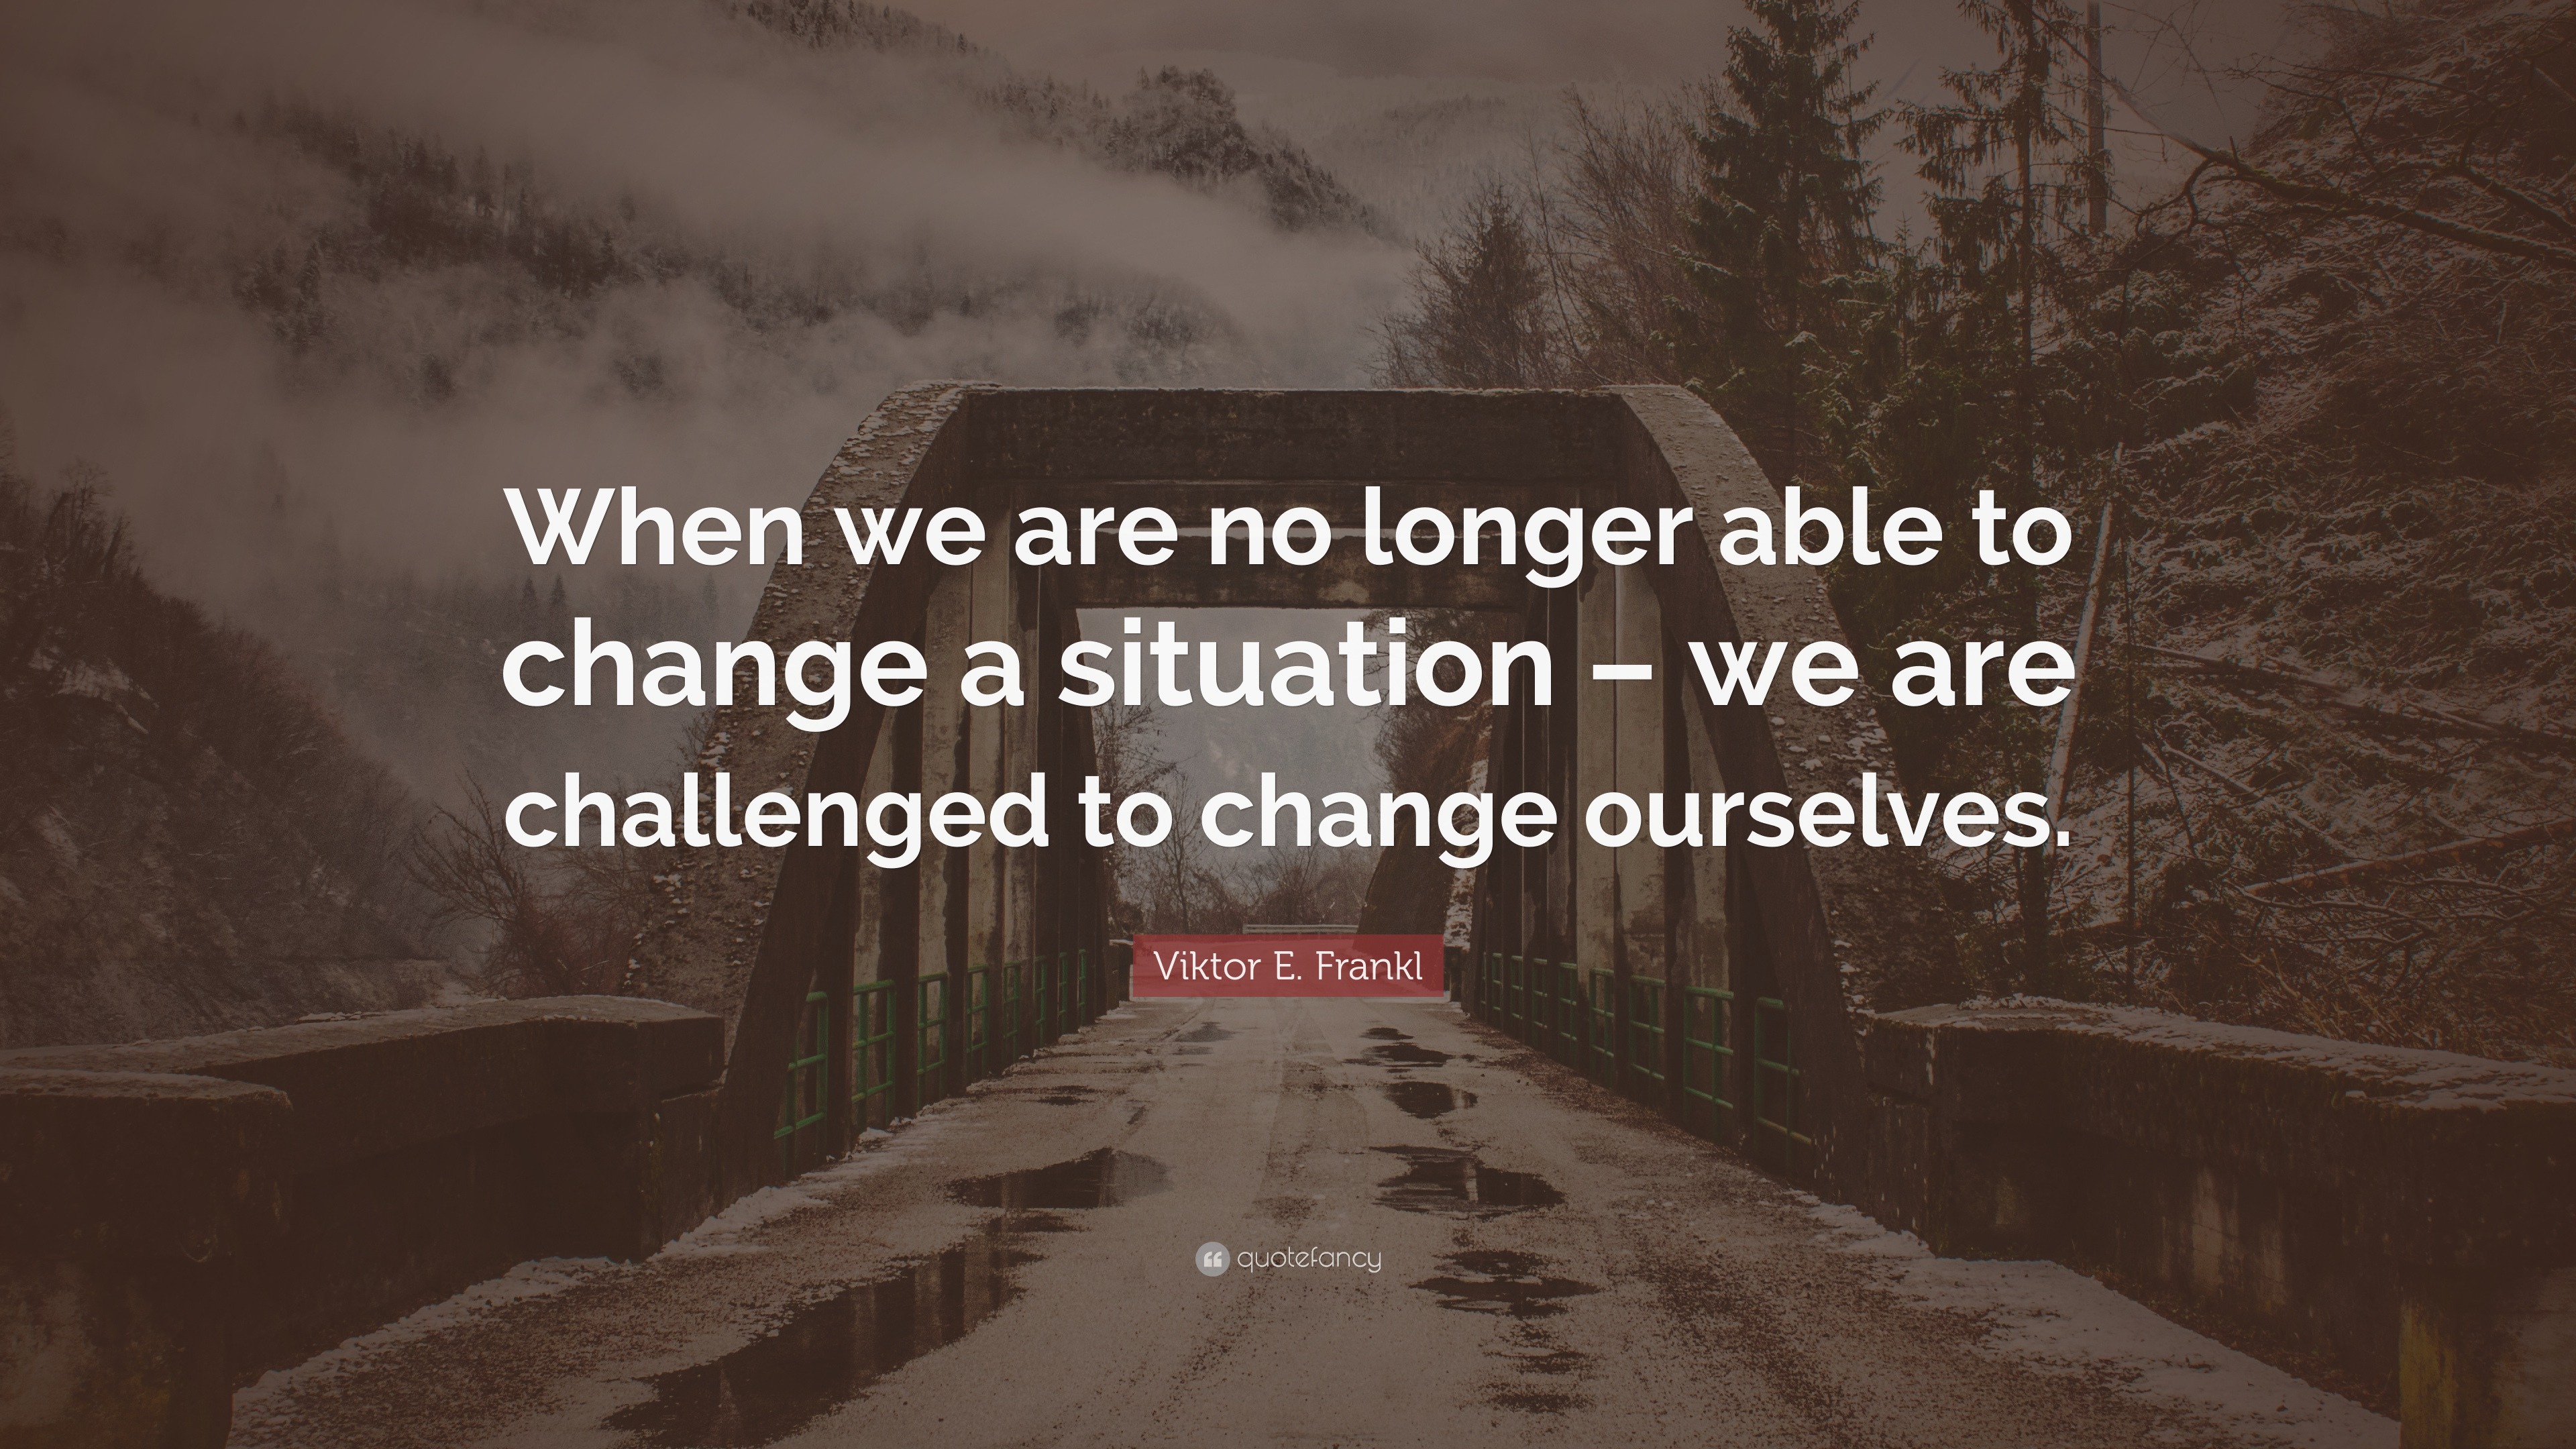 Viktor E. Frankl Quote “When we are no longer able to